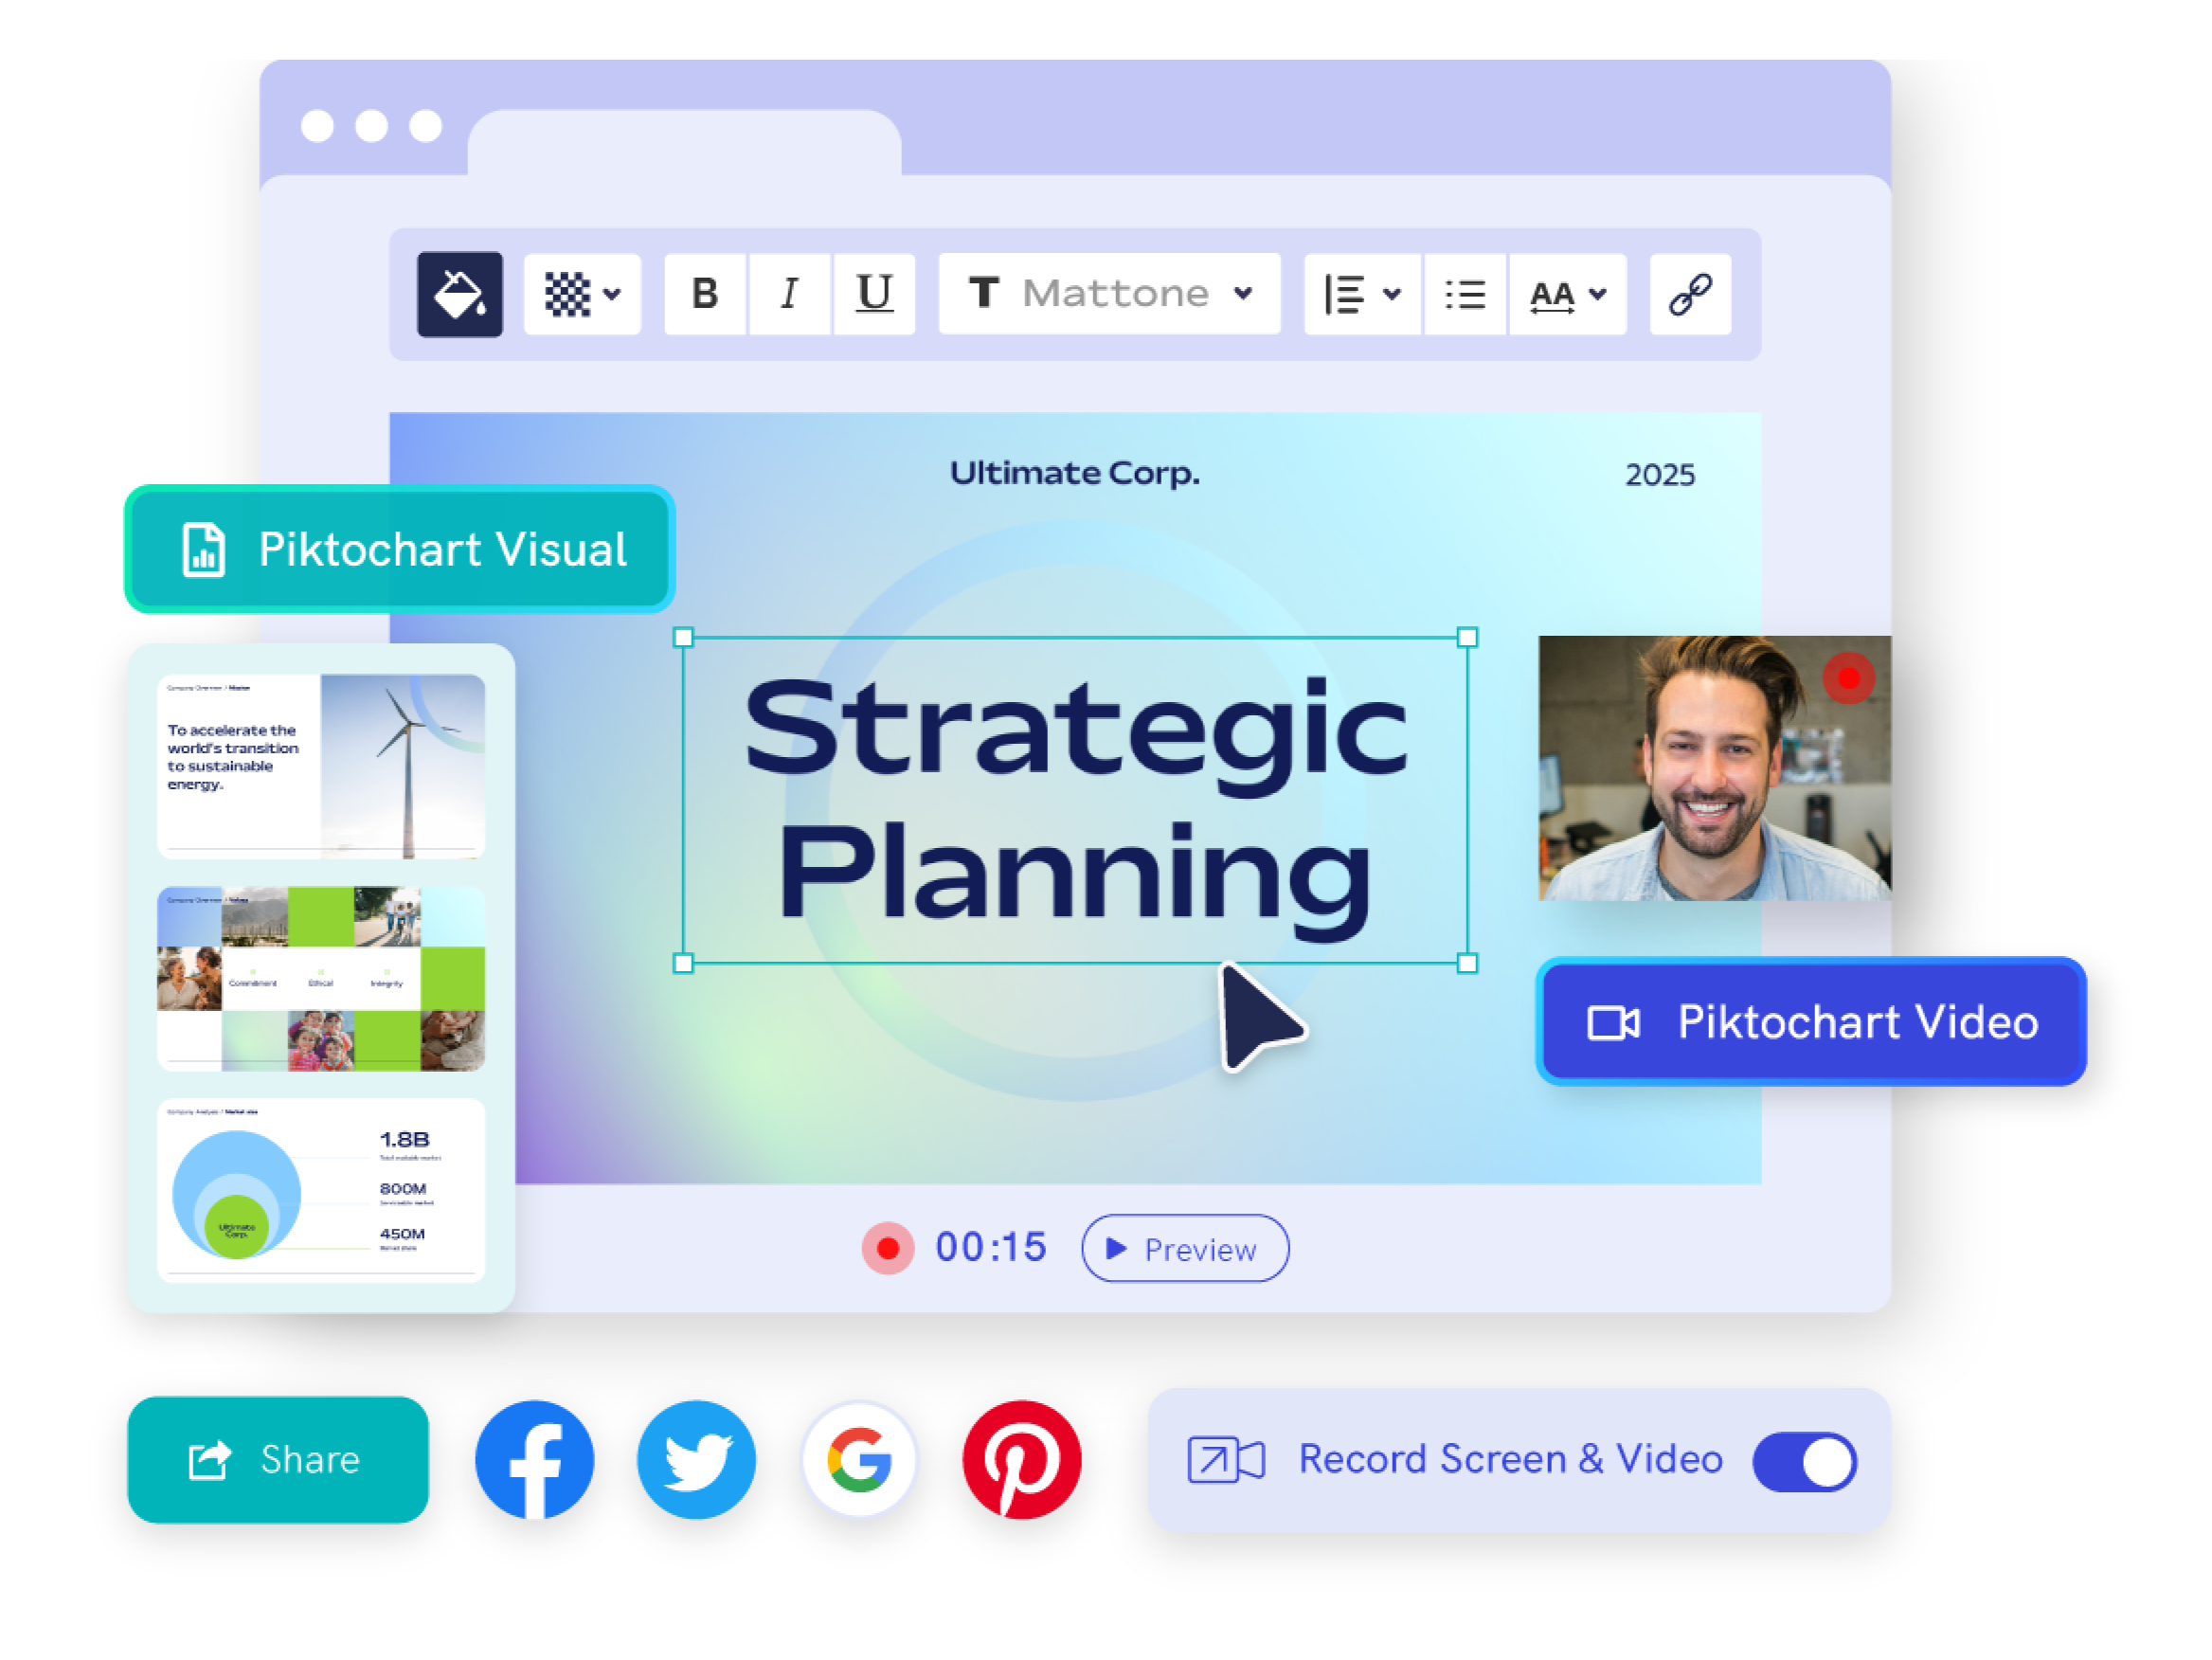 Piktochart is an all-in-one visual communication platform for creating professional visuals and repurposing video content online.